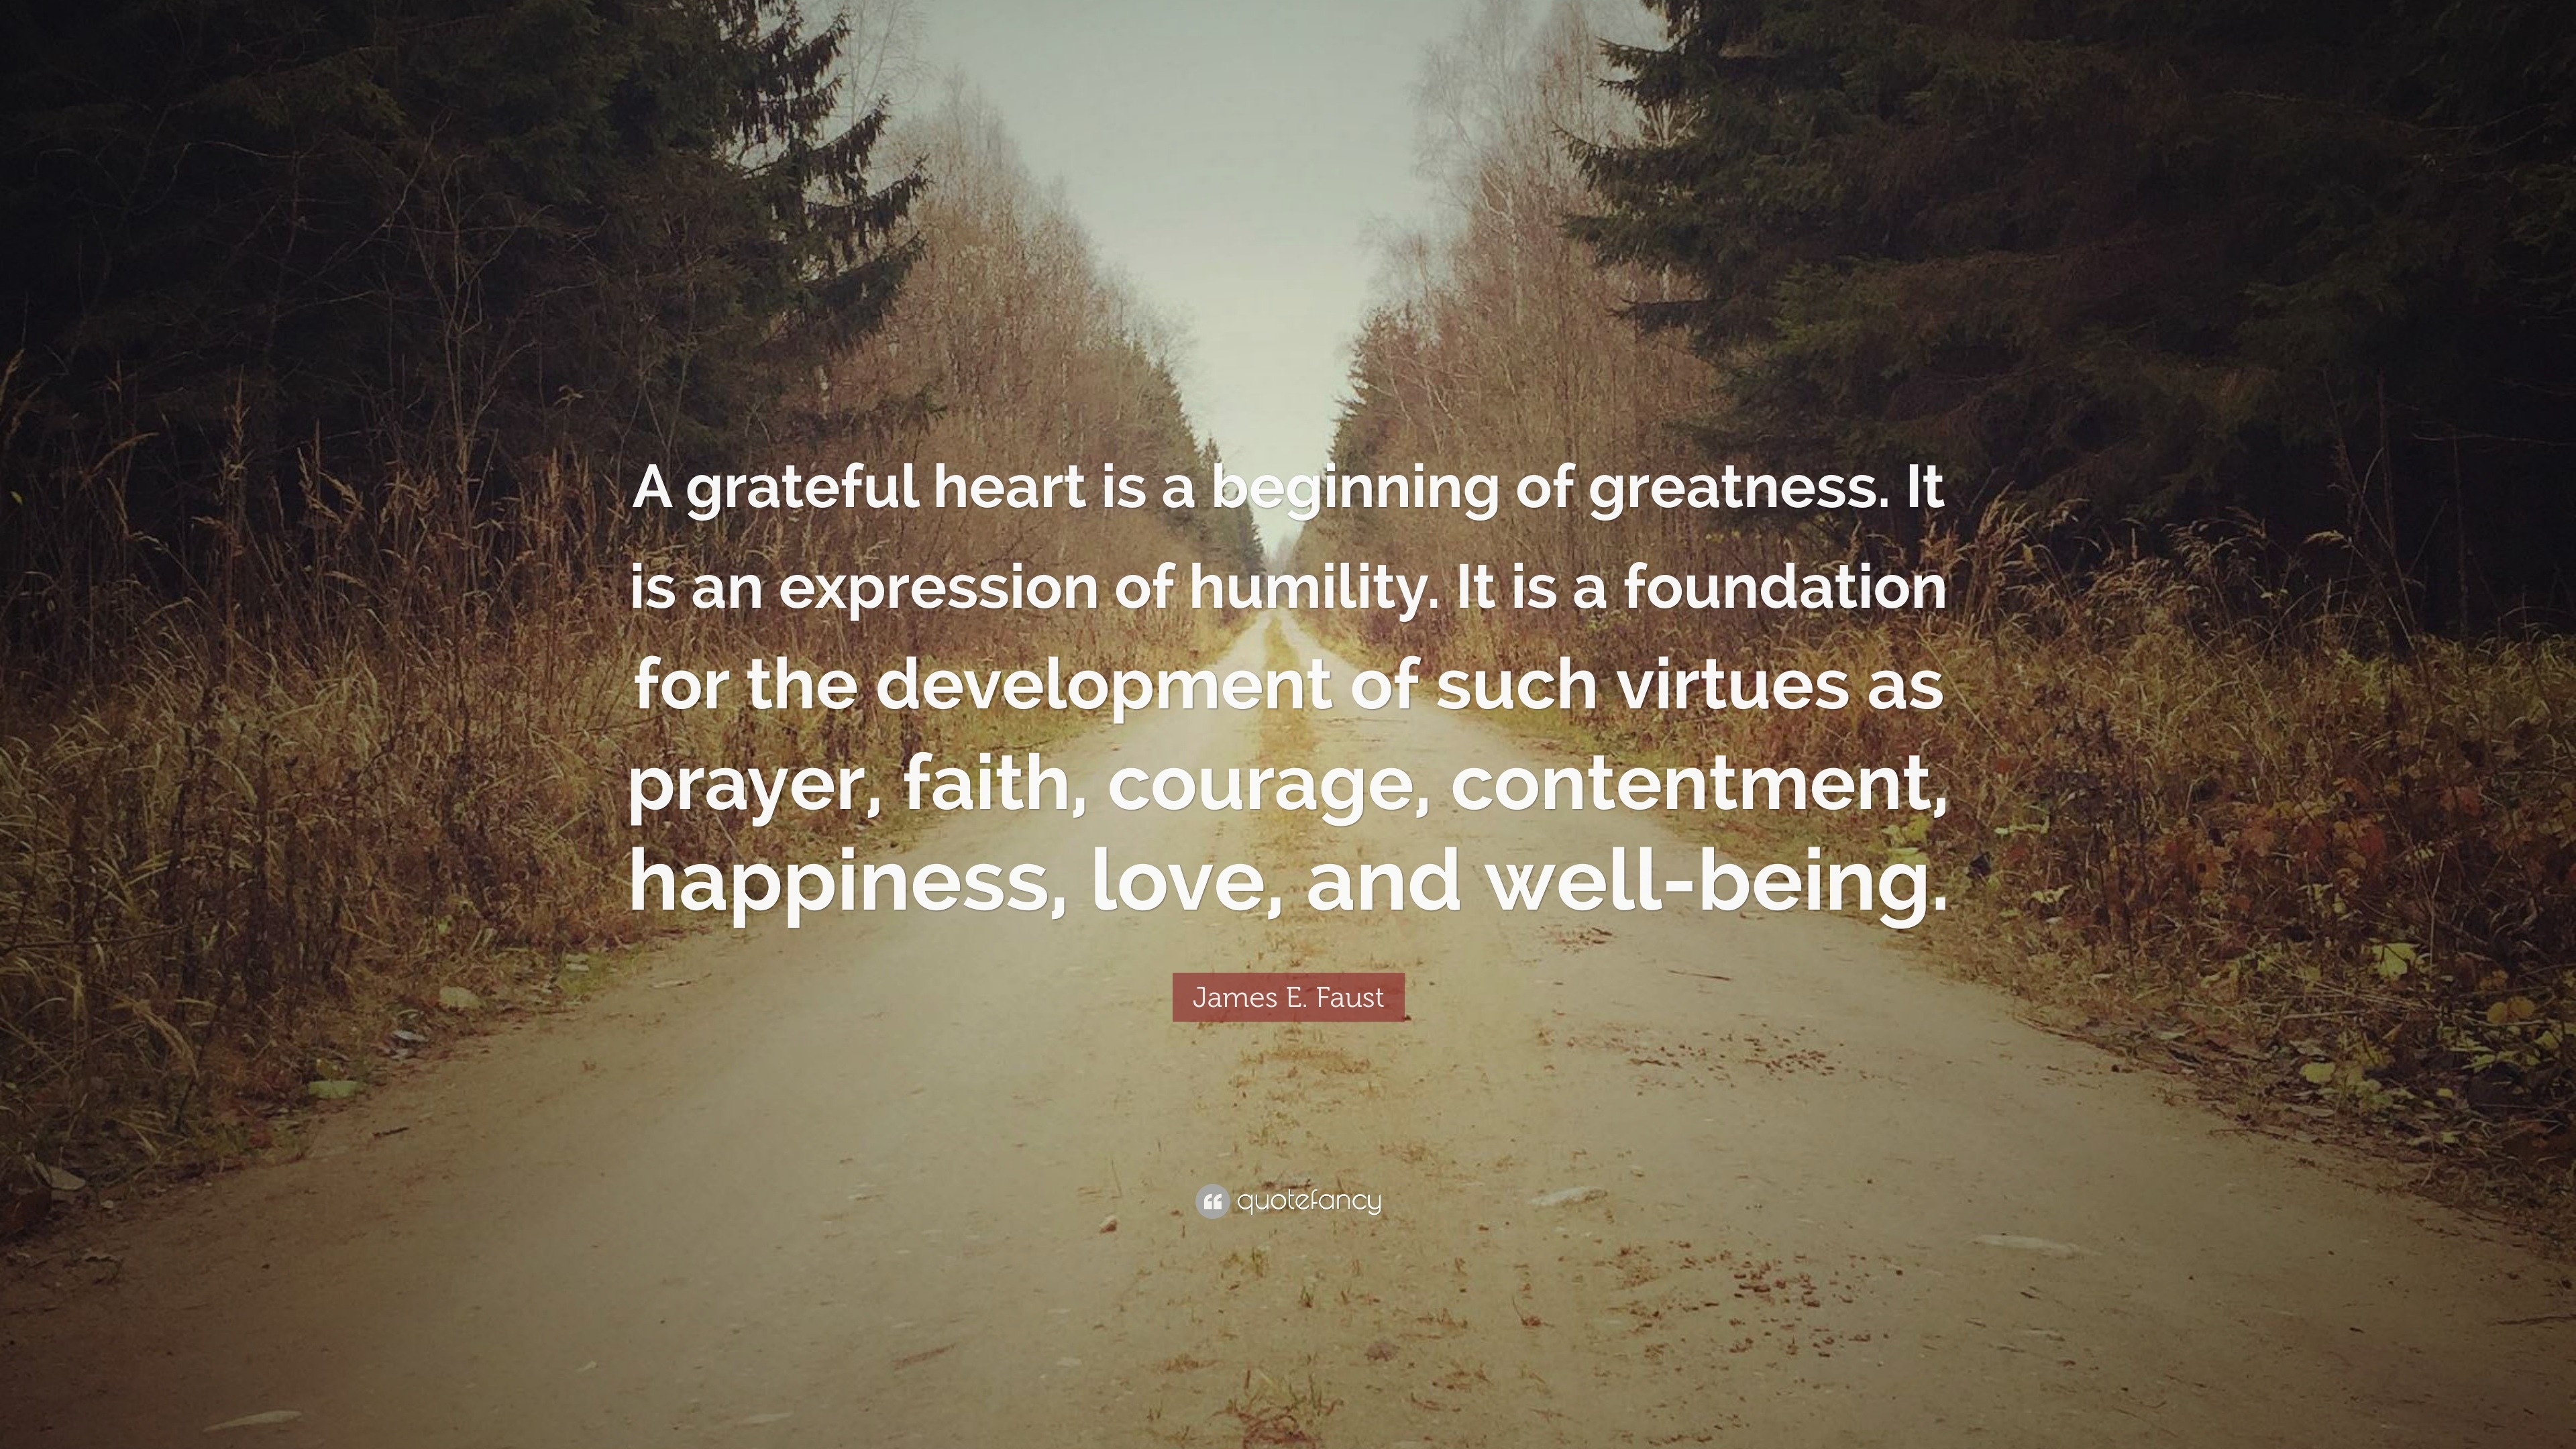 James E. Faust Quote: “A grateful heart is a beginning of greatness. It